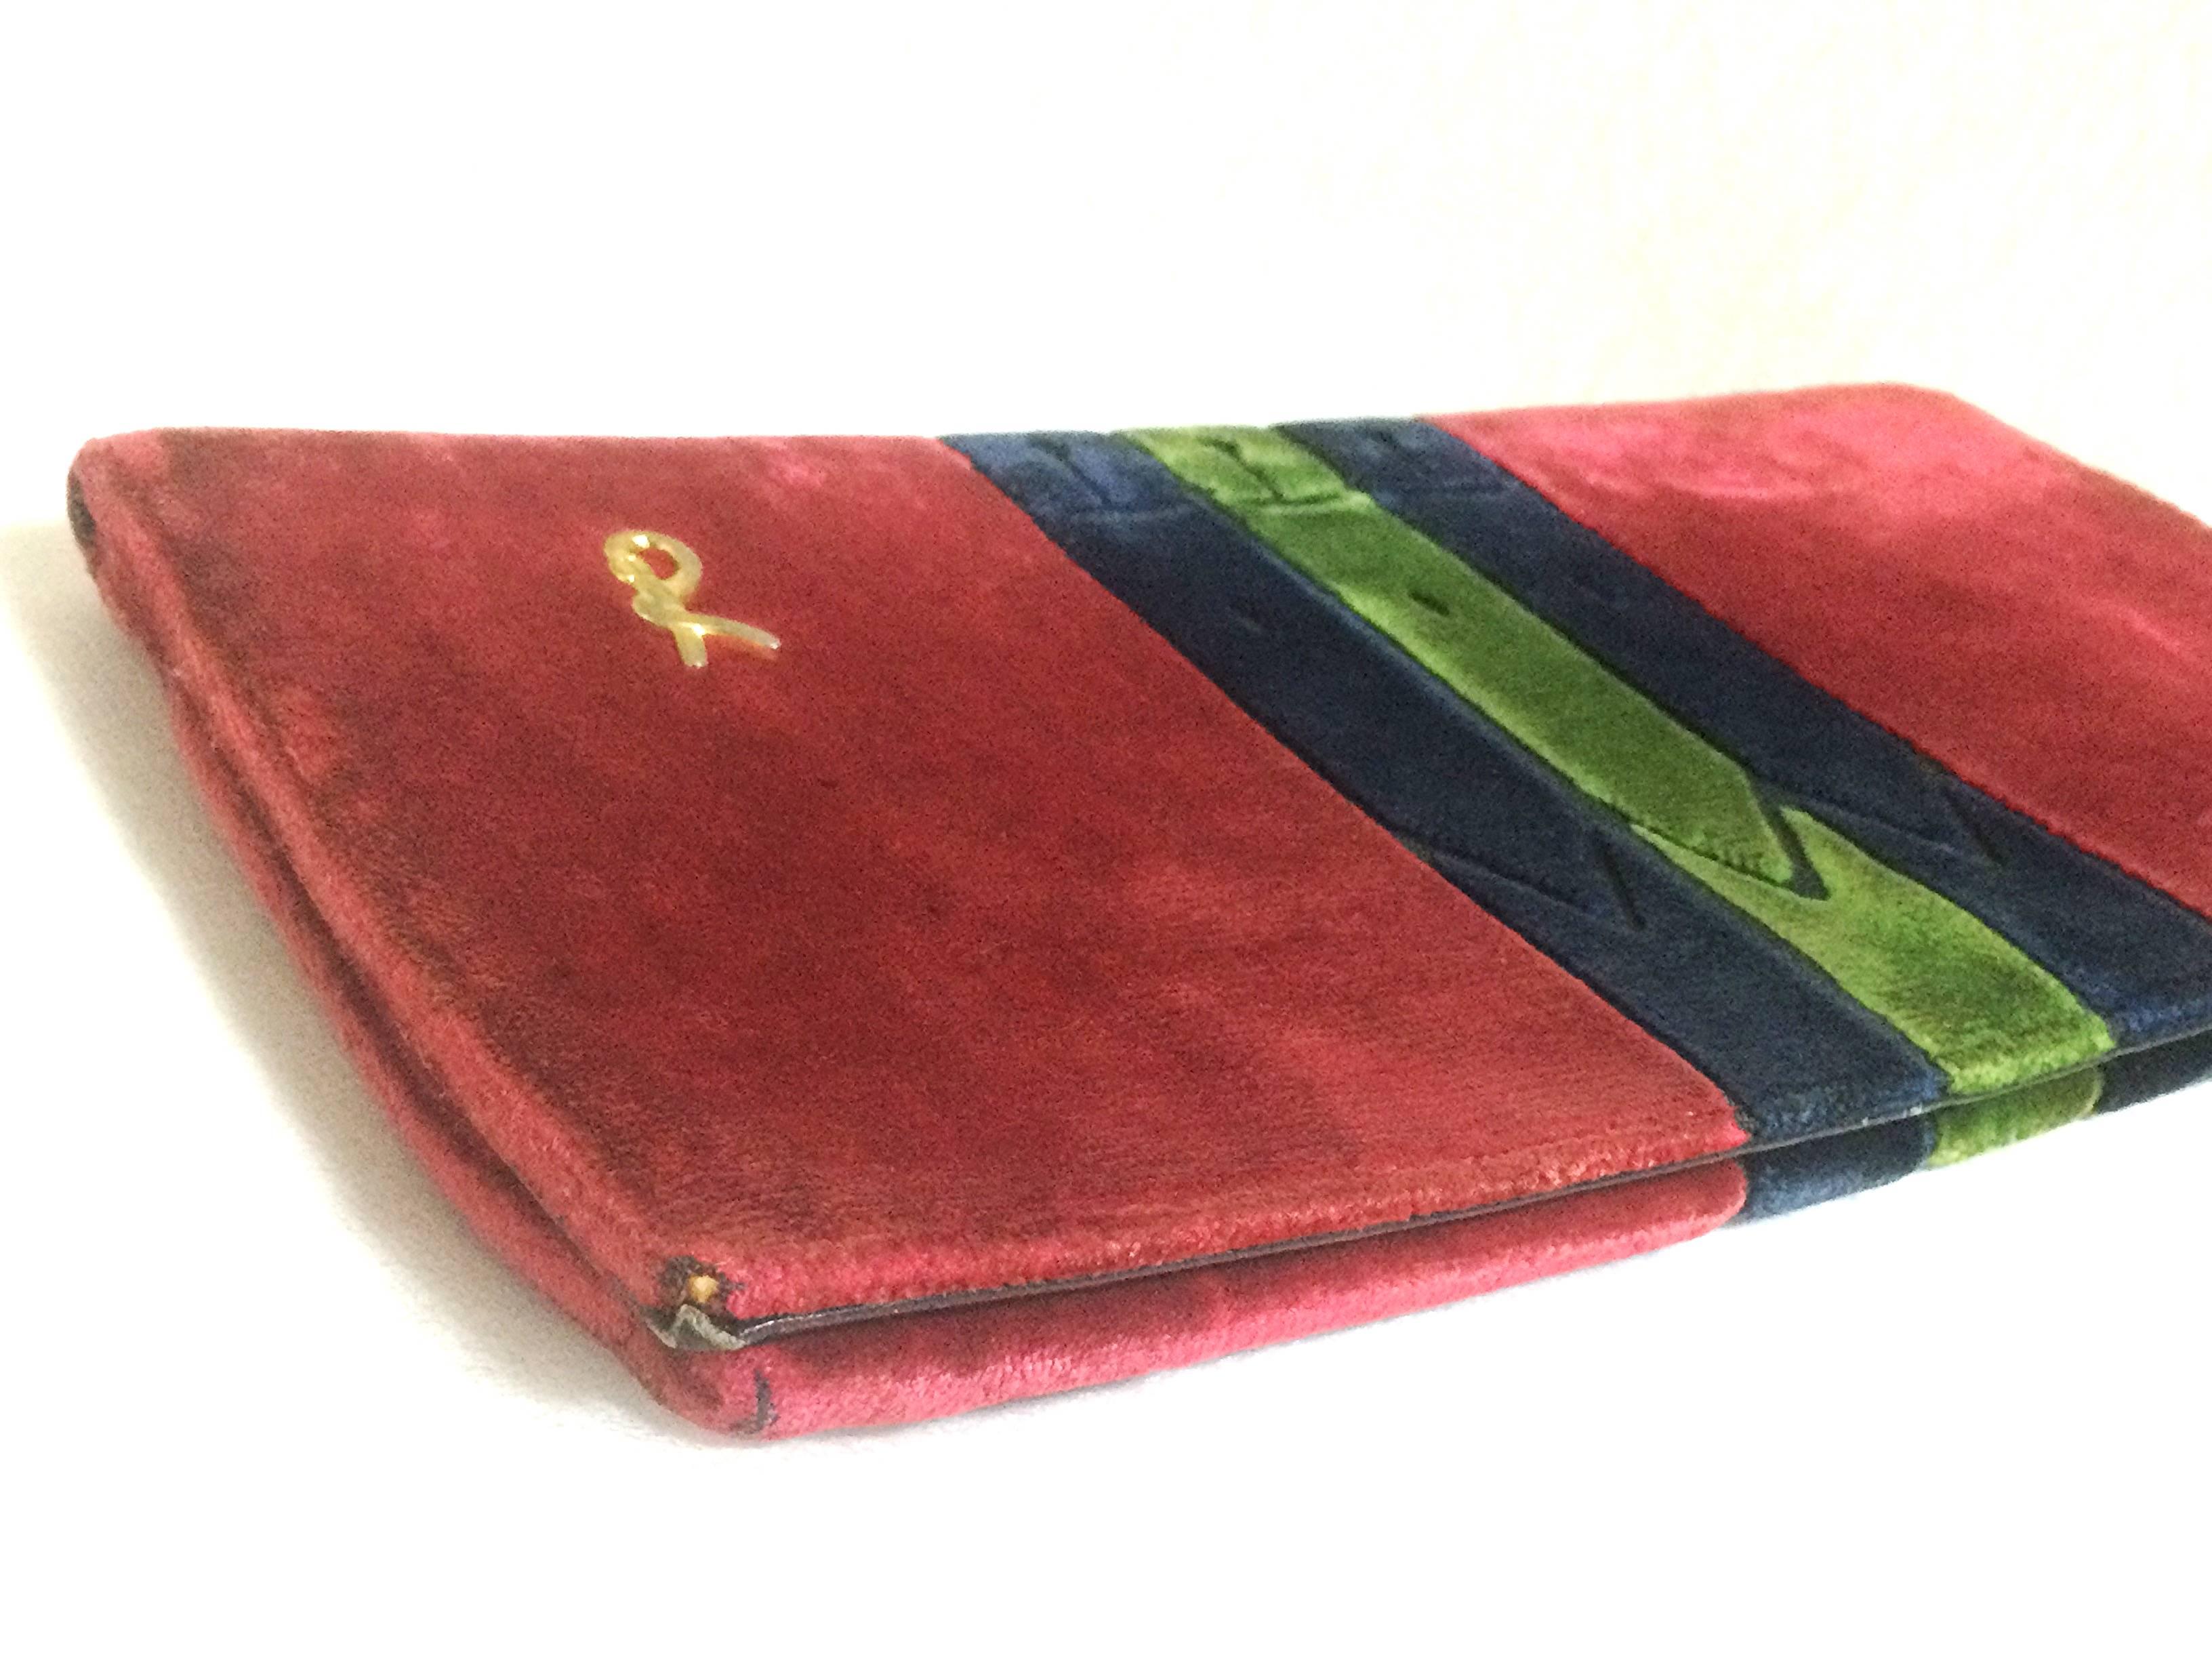 80's Vintage Roberta di Camerino velvet, chenille clutch in red, navy and green. 2